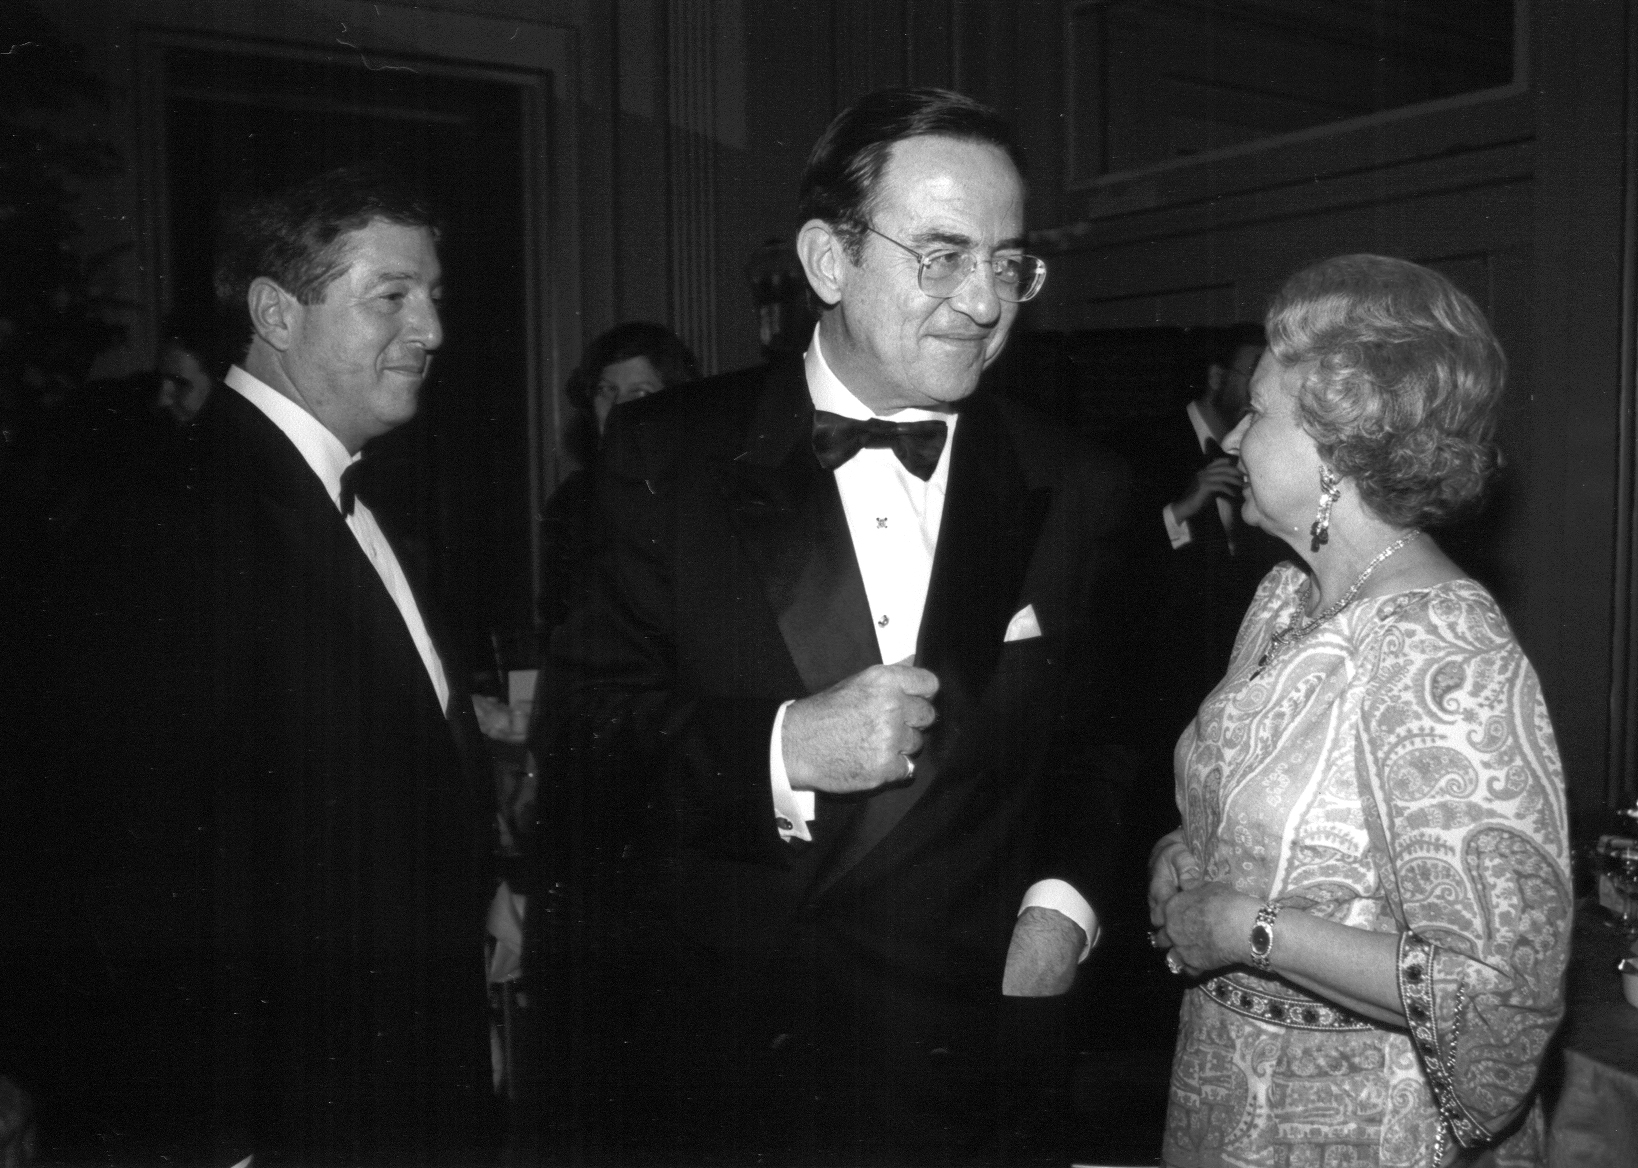 Late HM Queen Elizabeth II and late HM King Constantine II at HRH Crown Prince Alexander’s 50th birthday, London